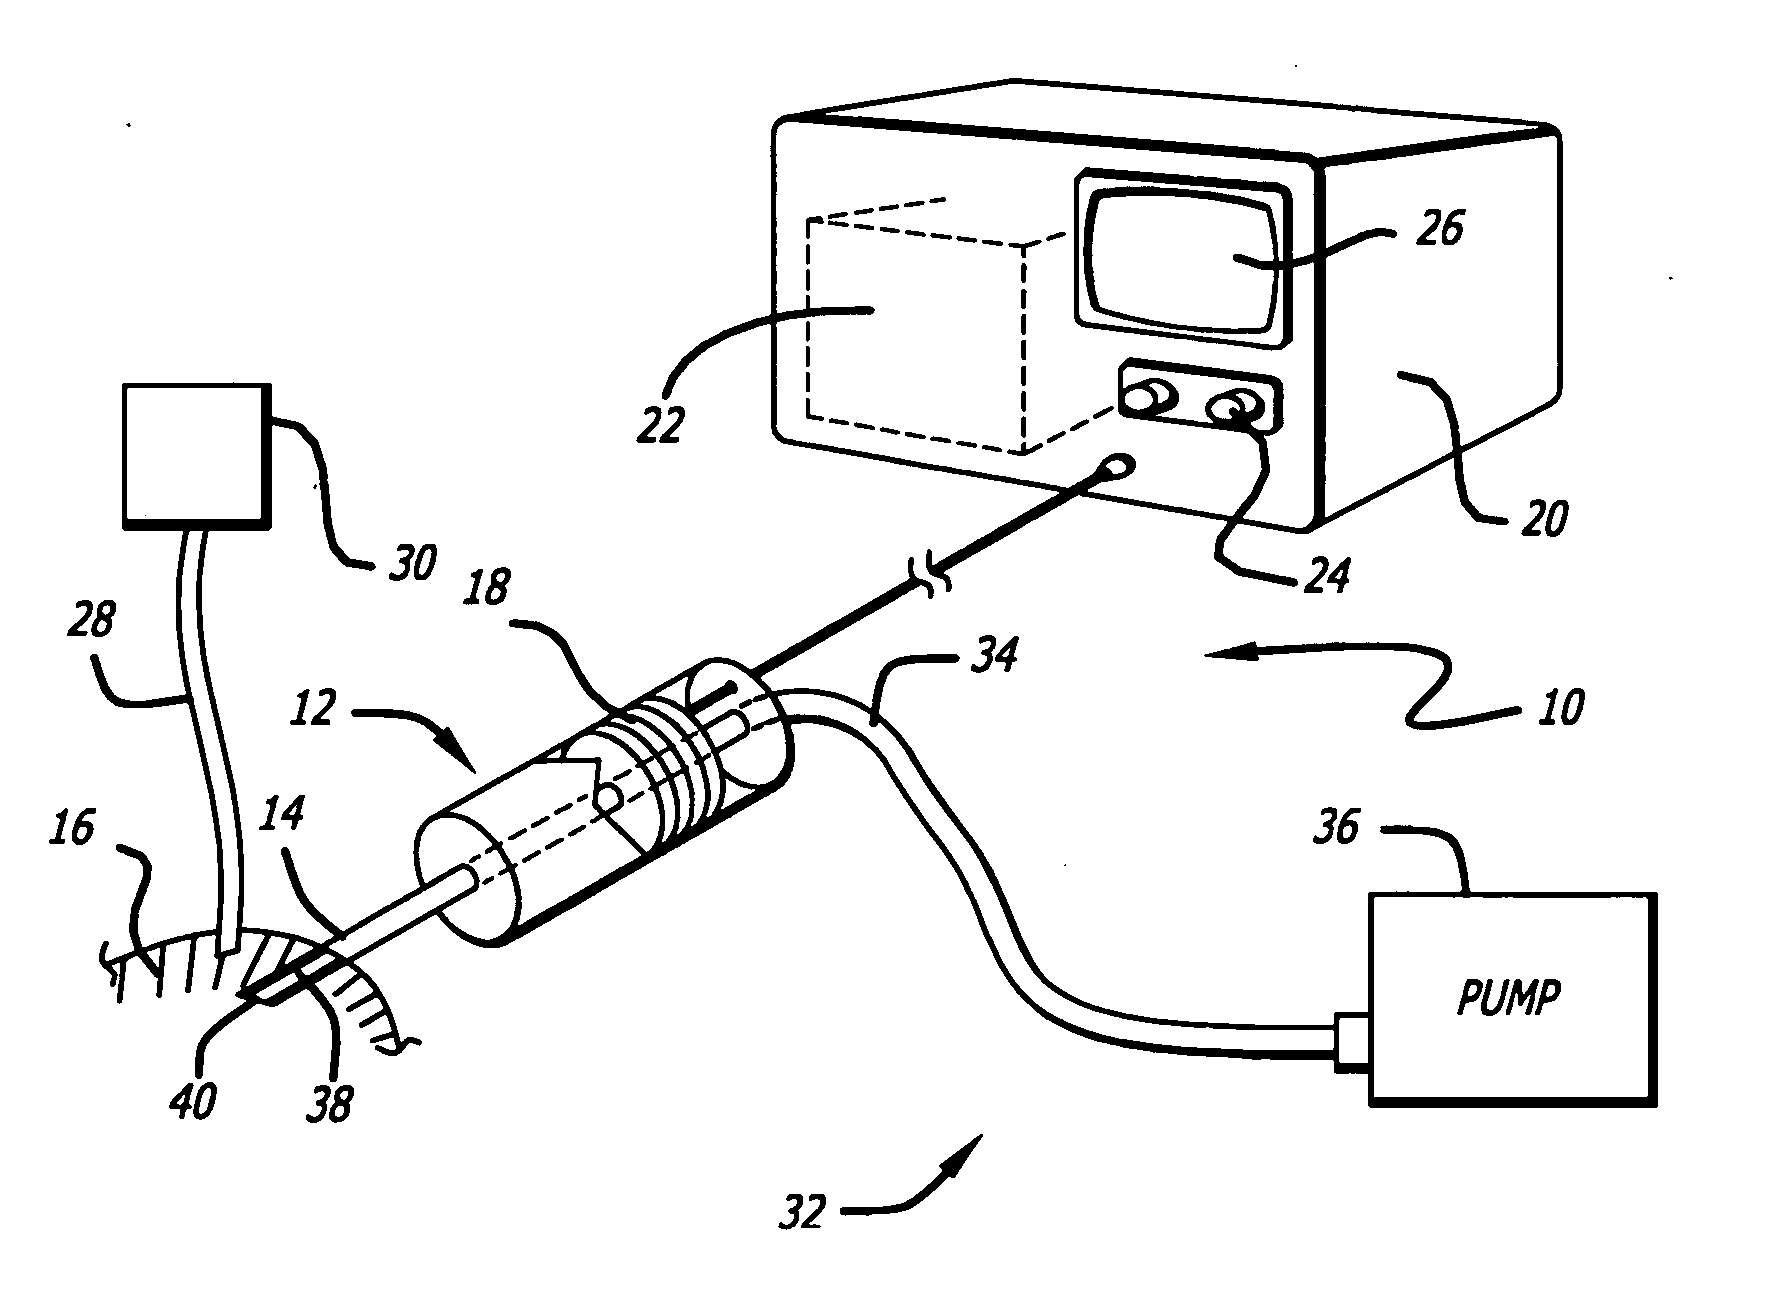 Aspiration system for medical devices